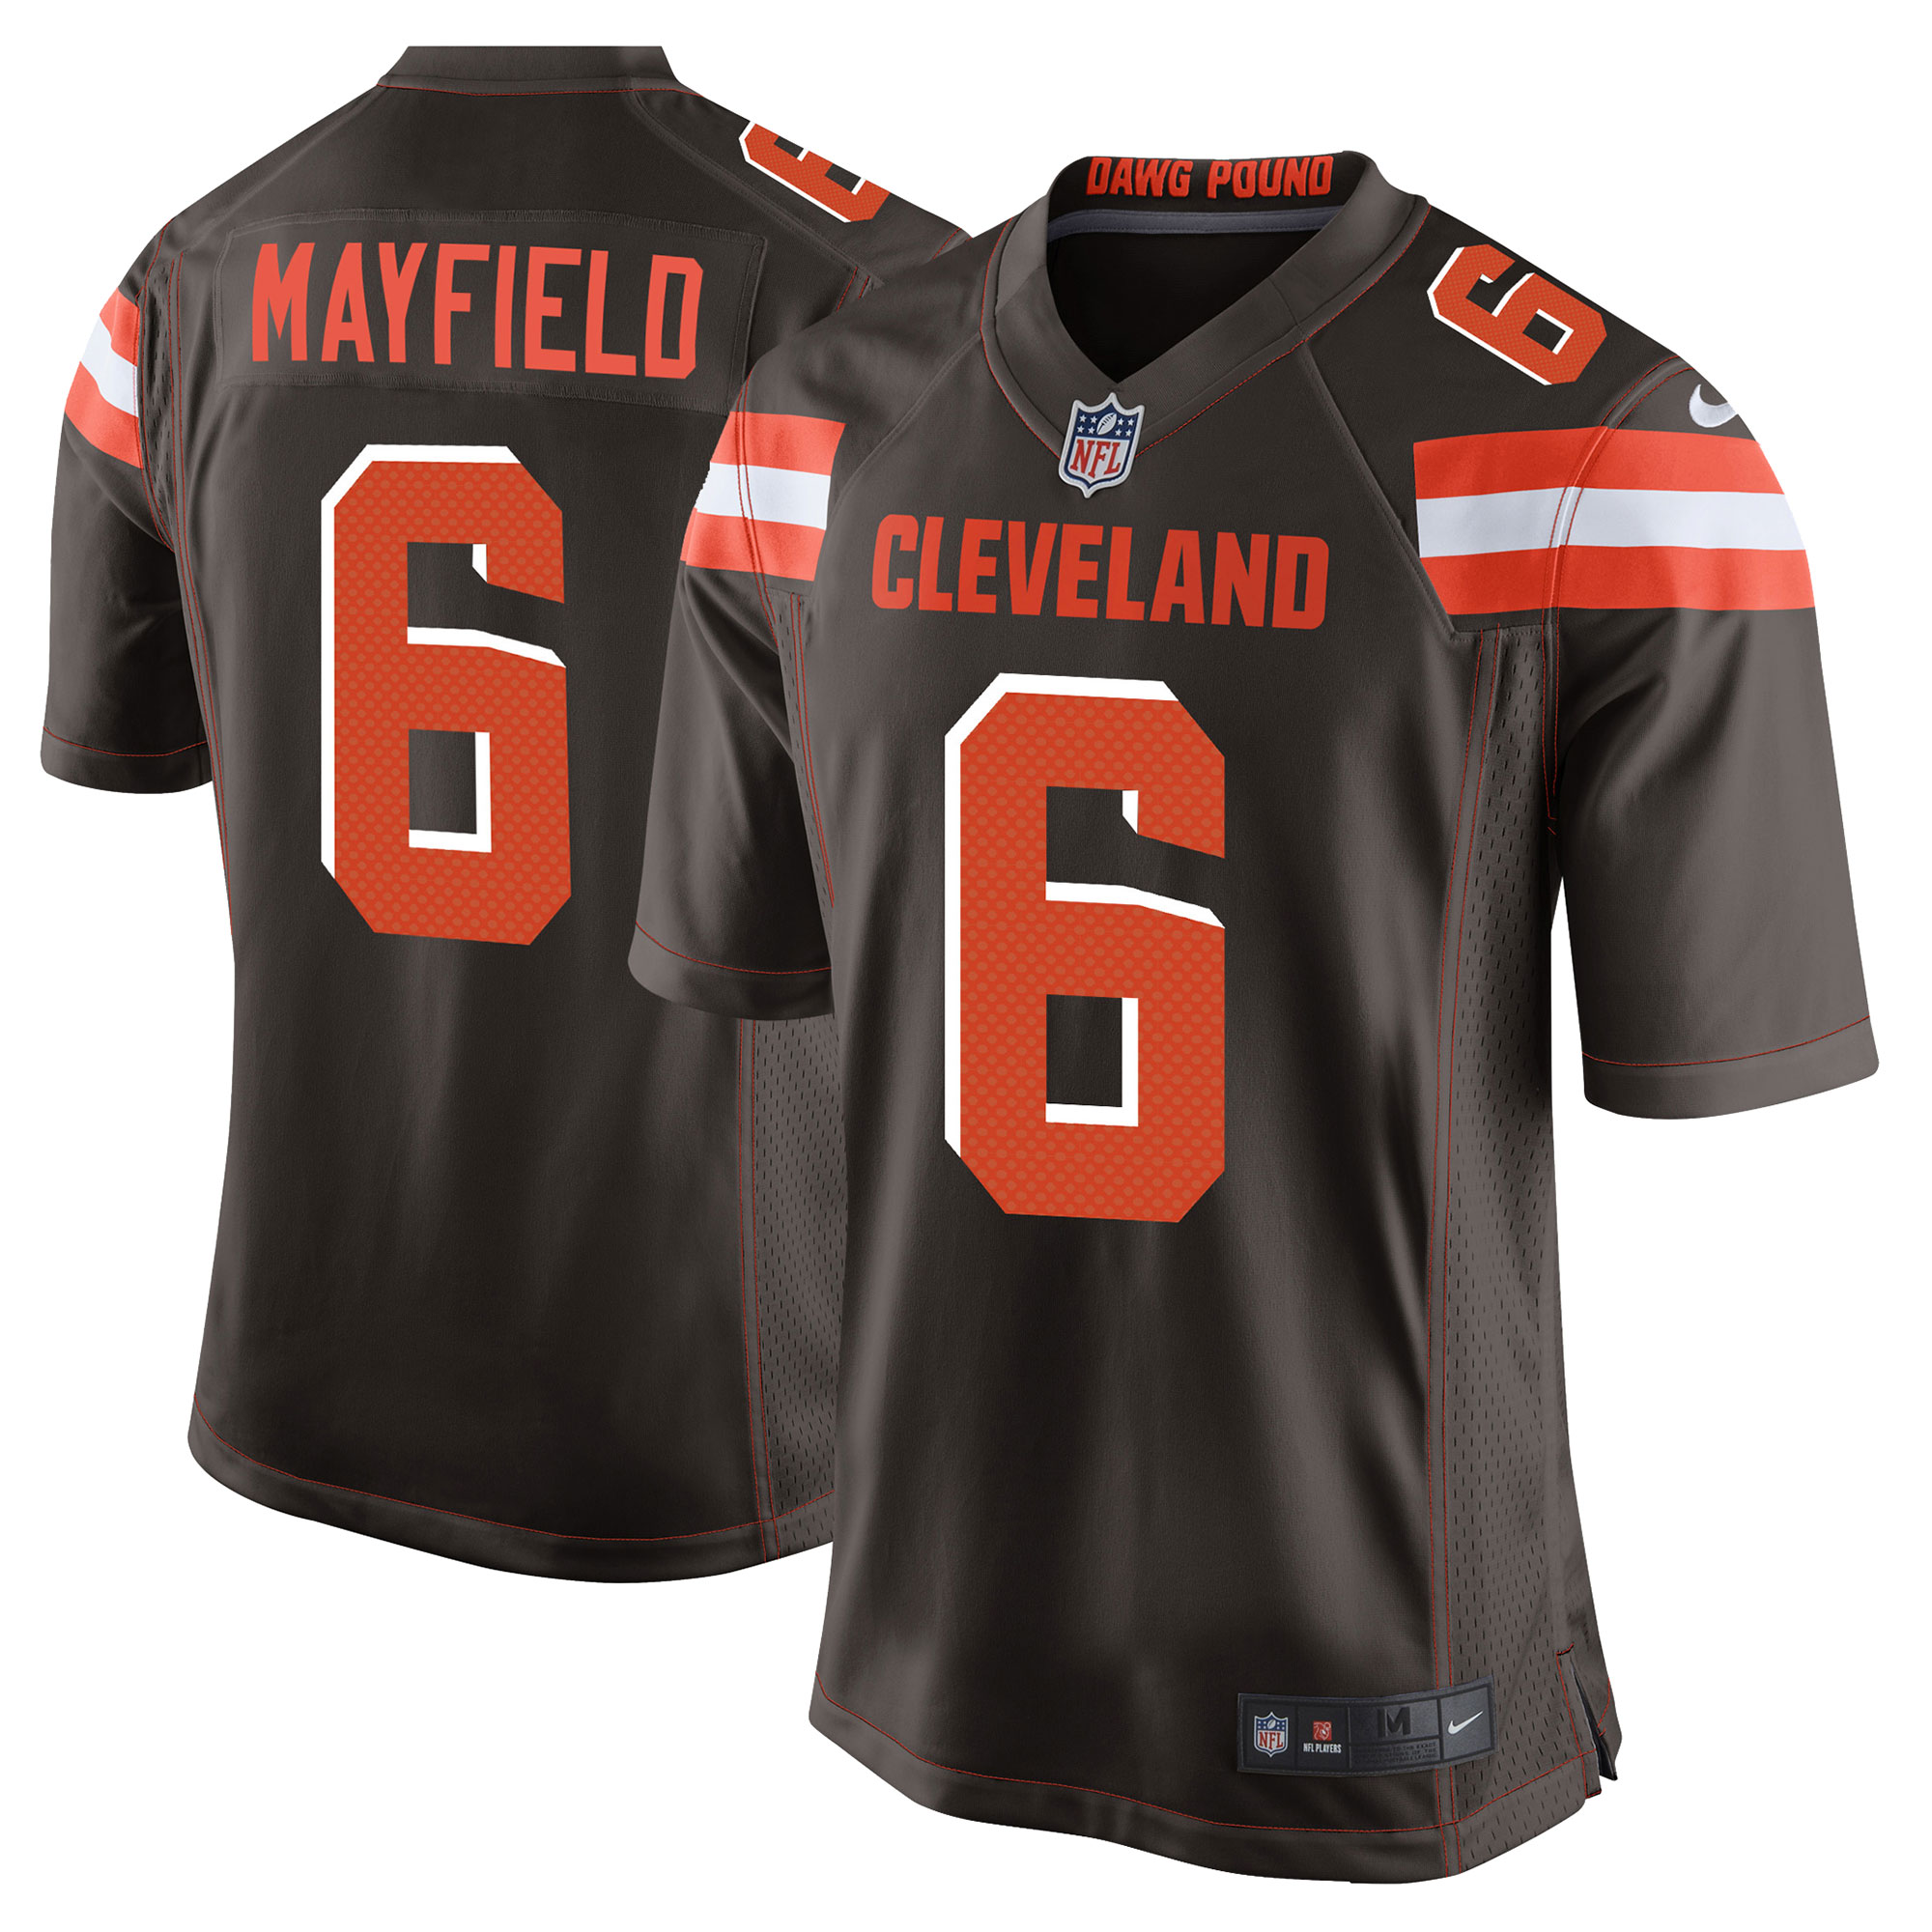 Cleveland Browns Home Game Jersey 